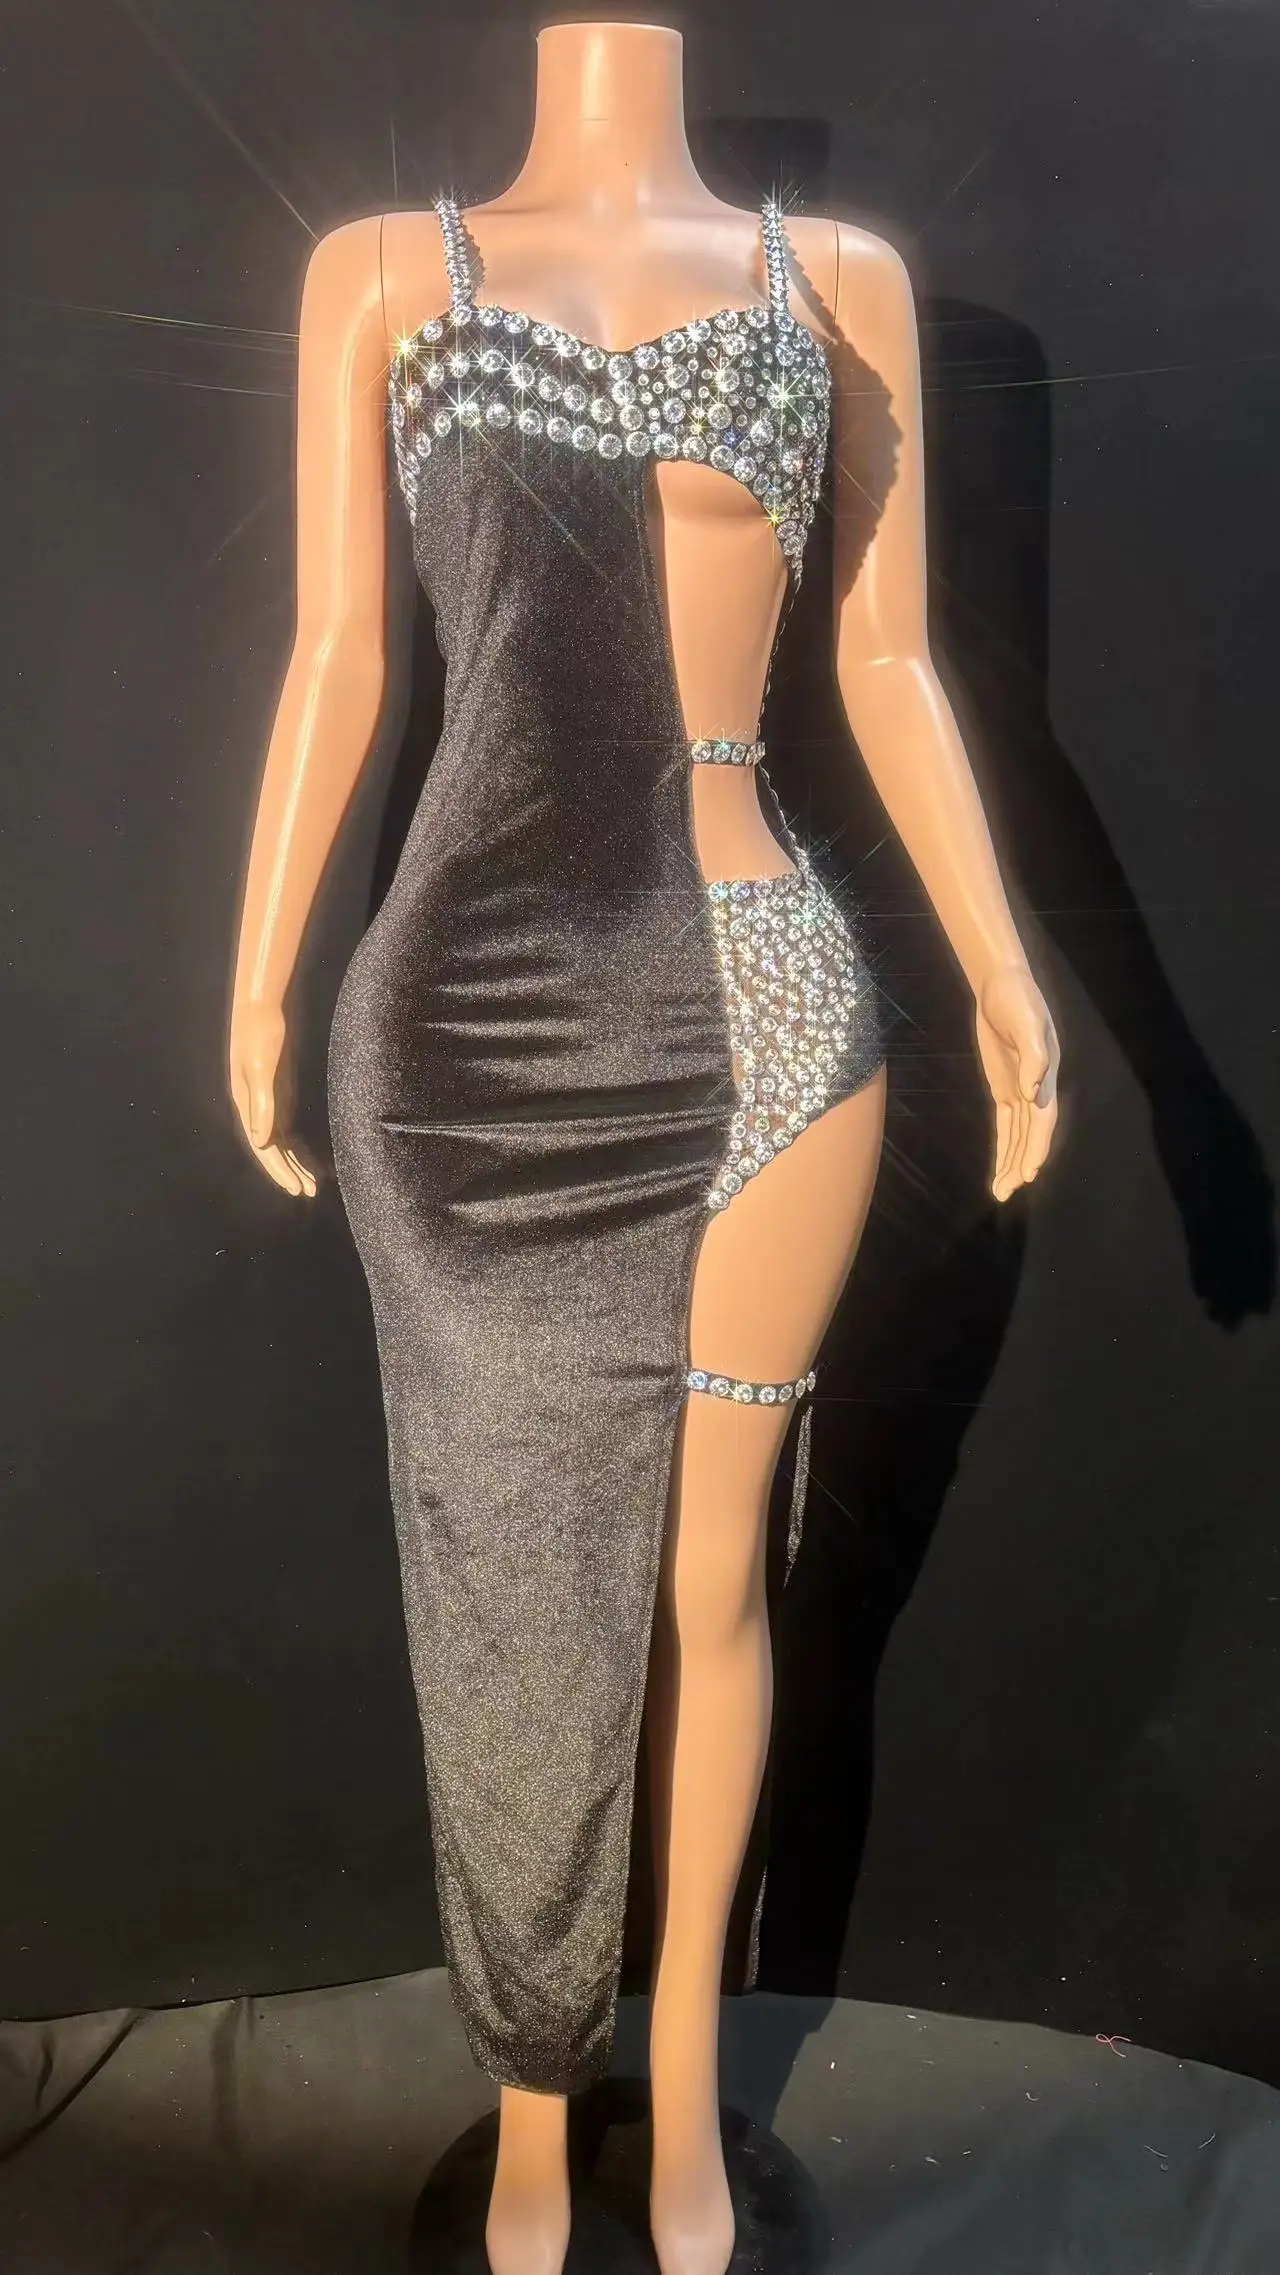 Sparkly Diamonds Black Velet Sexy Hollow Out Sheath Dress Evening Party Performance Costume Nightclub Singer Dancer Stage Wear